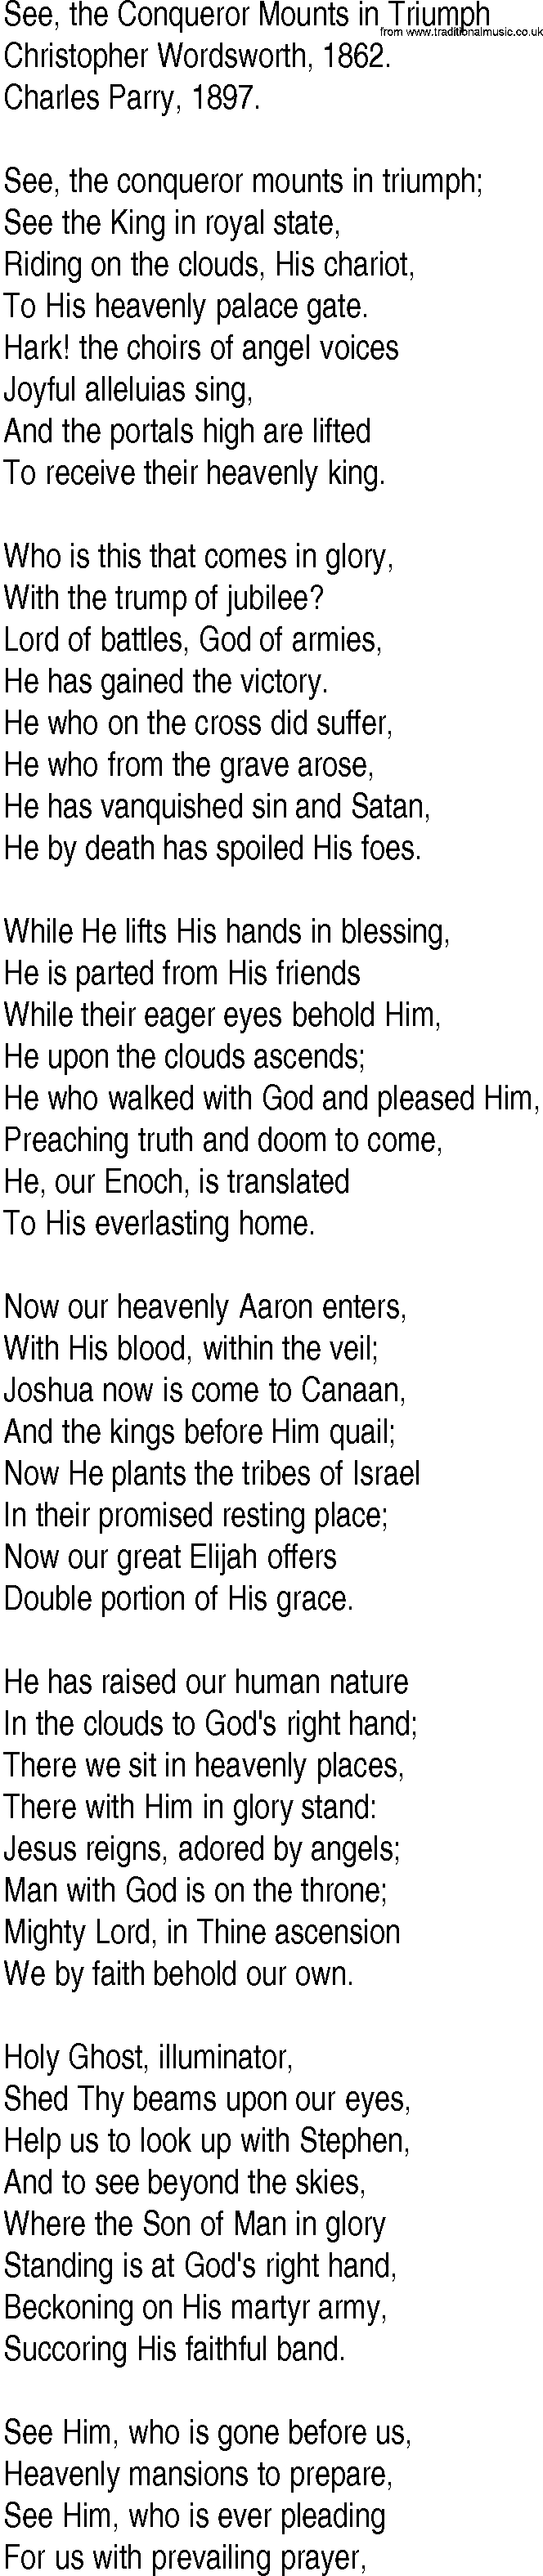 Hymn and Gospel Song: See, the Conqueror Mounts in Triumph by Christopher Wordsworth lyrics